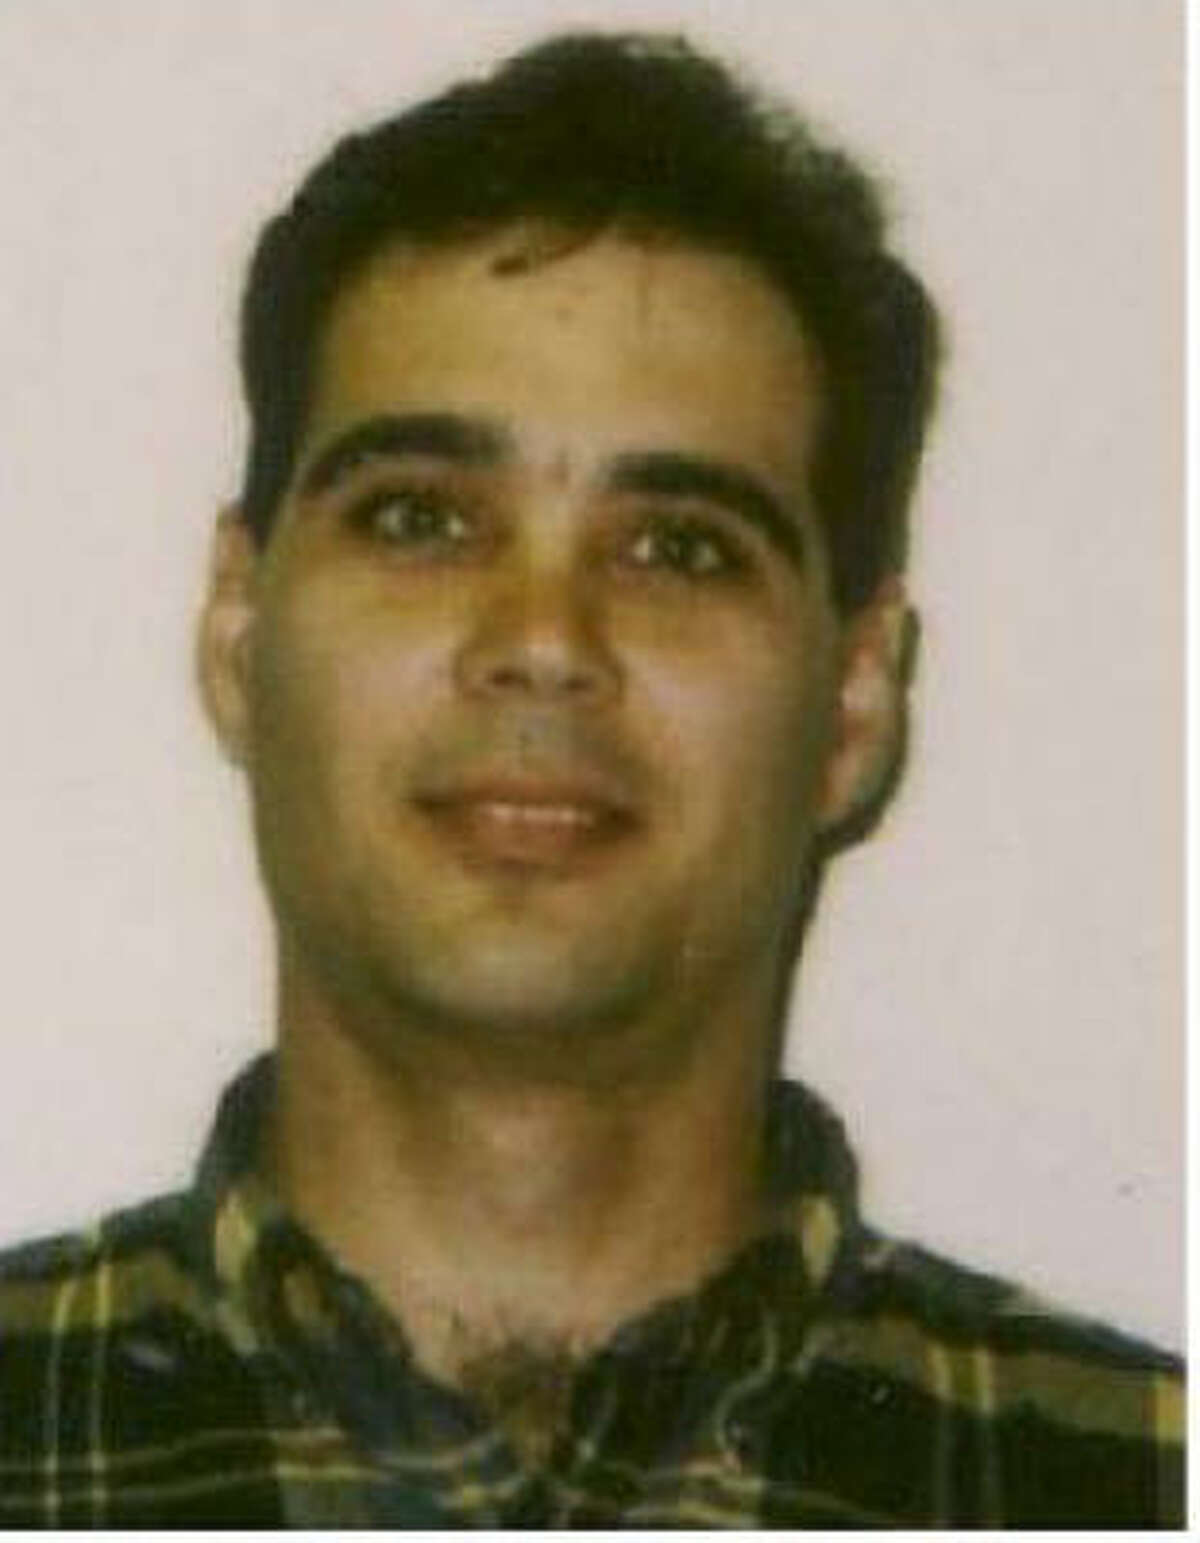 John Erick AndersonRace: White Sex: Male DOB: 09/25/1960 Height: 6’02” Weight: 208 lbs. SMT: Scar on right forearm AKA: John Erik Anderson Wanted for: Parole Violation and Failure to Register as a Sex Offender CCH: Aggravated Sexual Assault Last Known Area: Austin, TX Caution: Subject should be considered ARMED and DANGEROUS! Visit Texas Department of Public Safety for more information or to report a tip.